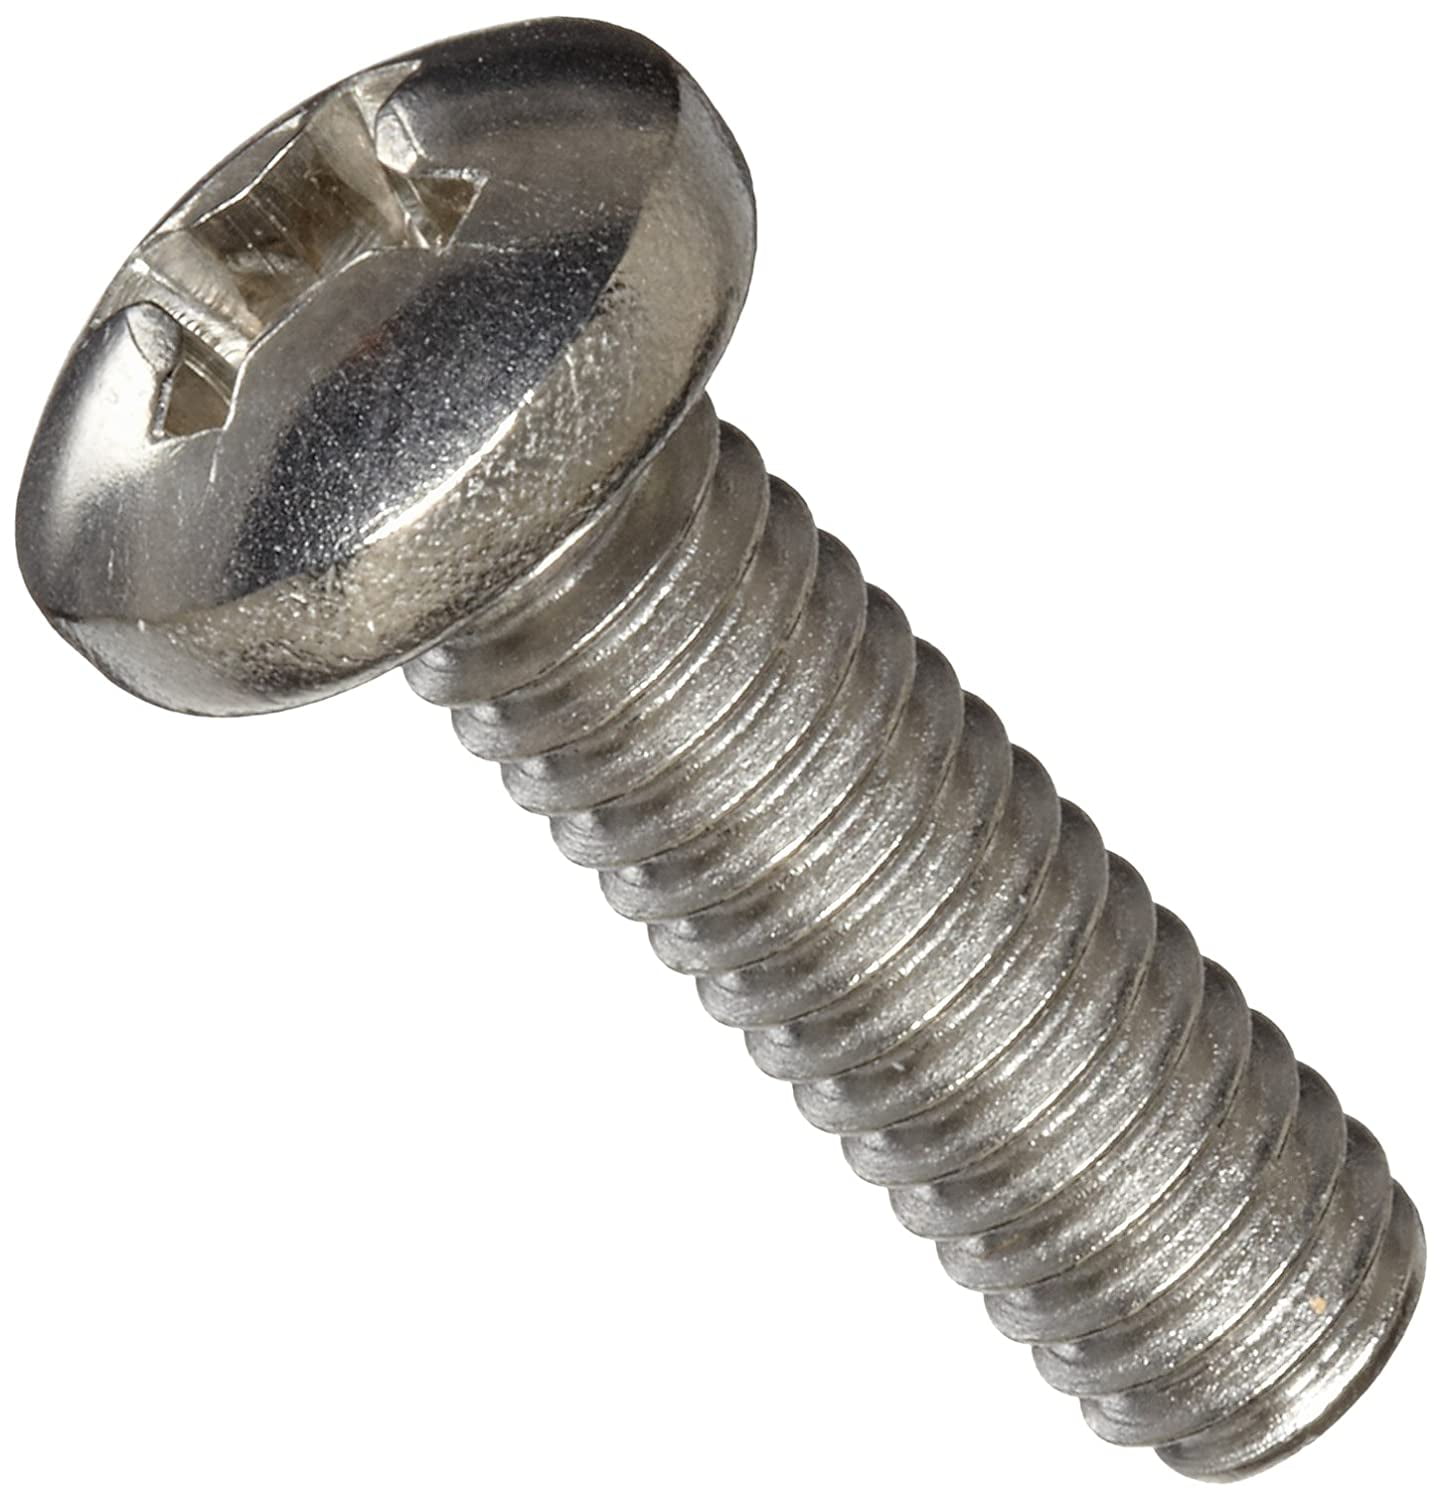 1/4-20 UNC Threads 18-8 Stainless Steel Machine Screw 3/8 Length 1/4-20 UNC Threads Fully Threaded Phillips Drive Truss Head Pack of 50 Meets ASME B18.6.3 Pack of 50 Small Parts 1406MPT188 Plain Finish 3/8 Length